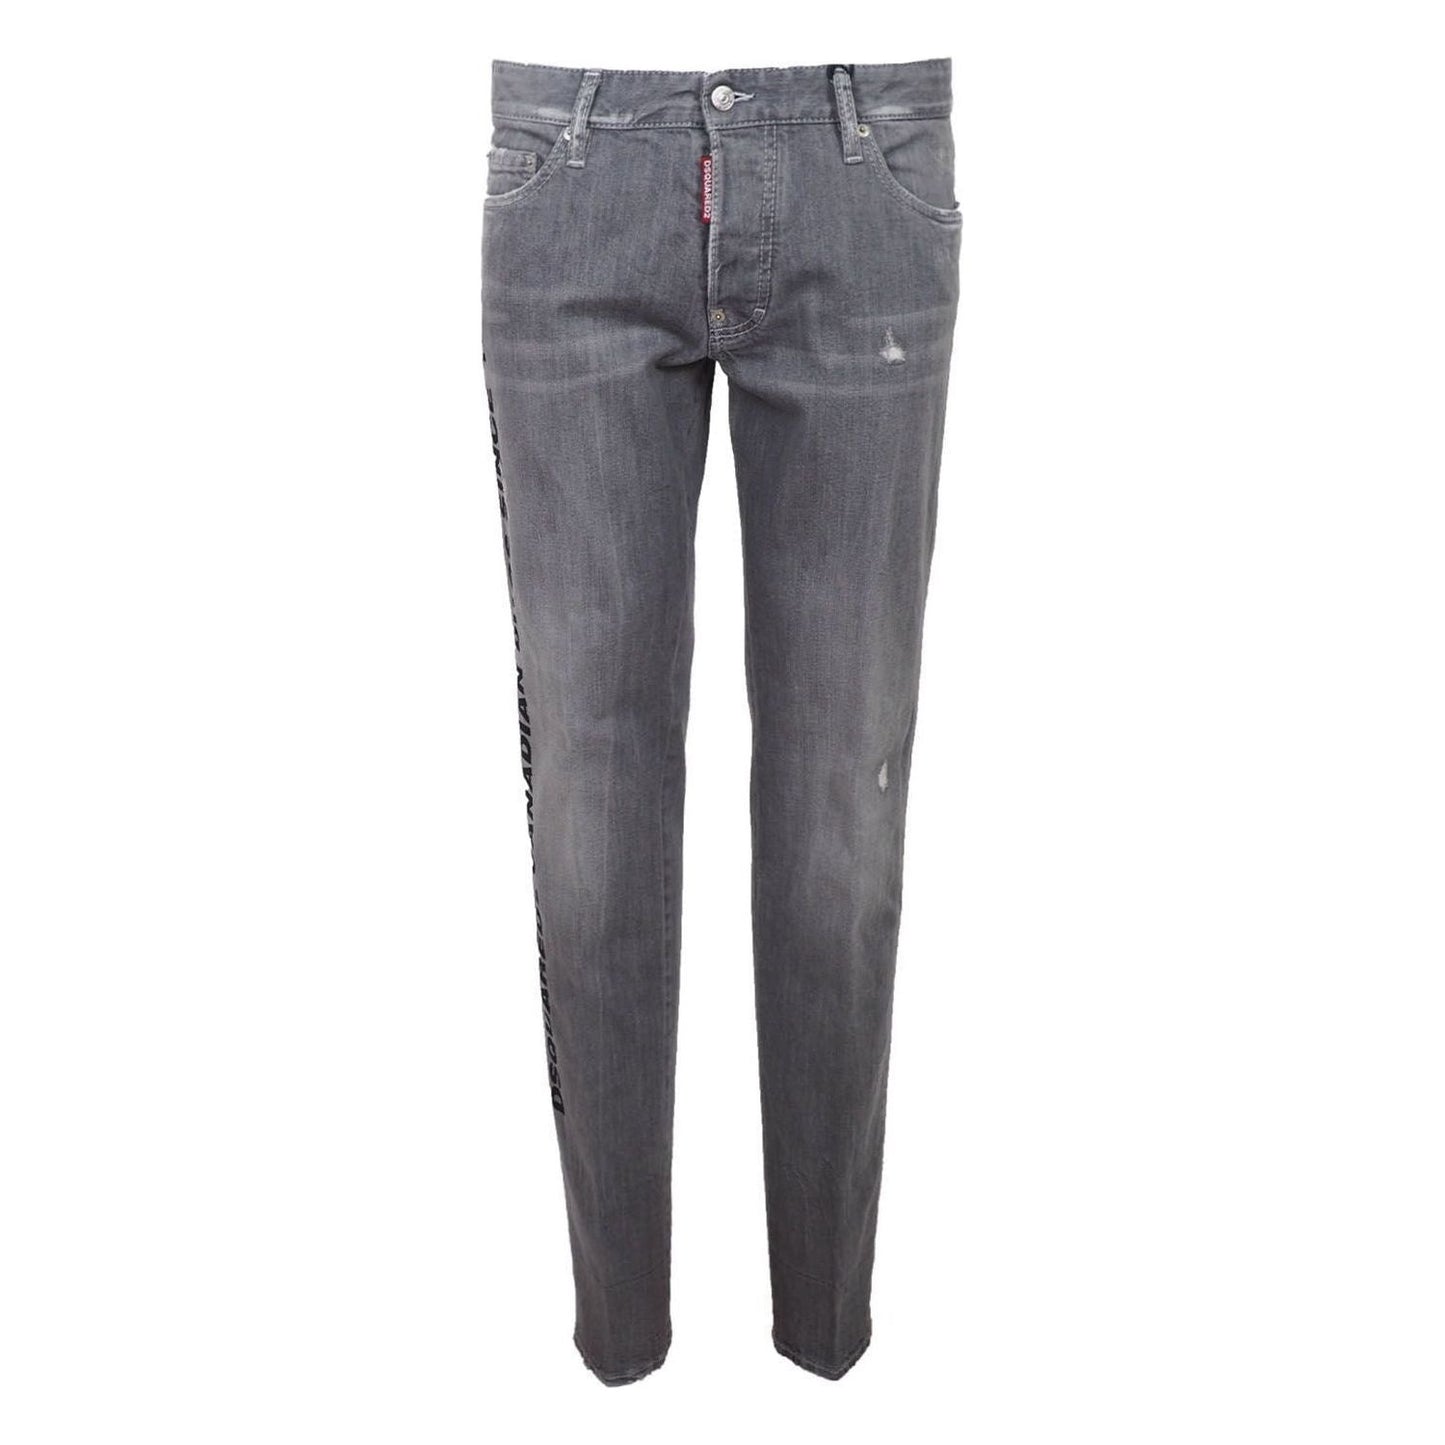 Dsquared² Chic Gray Slim-Fit Denim for the Modern Man gray-cotton-jeans-pant